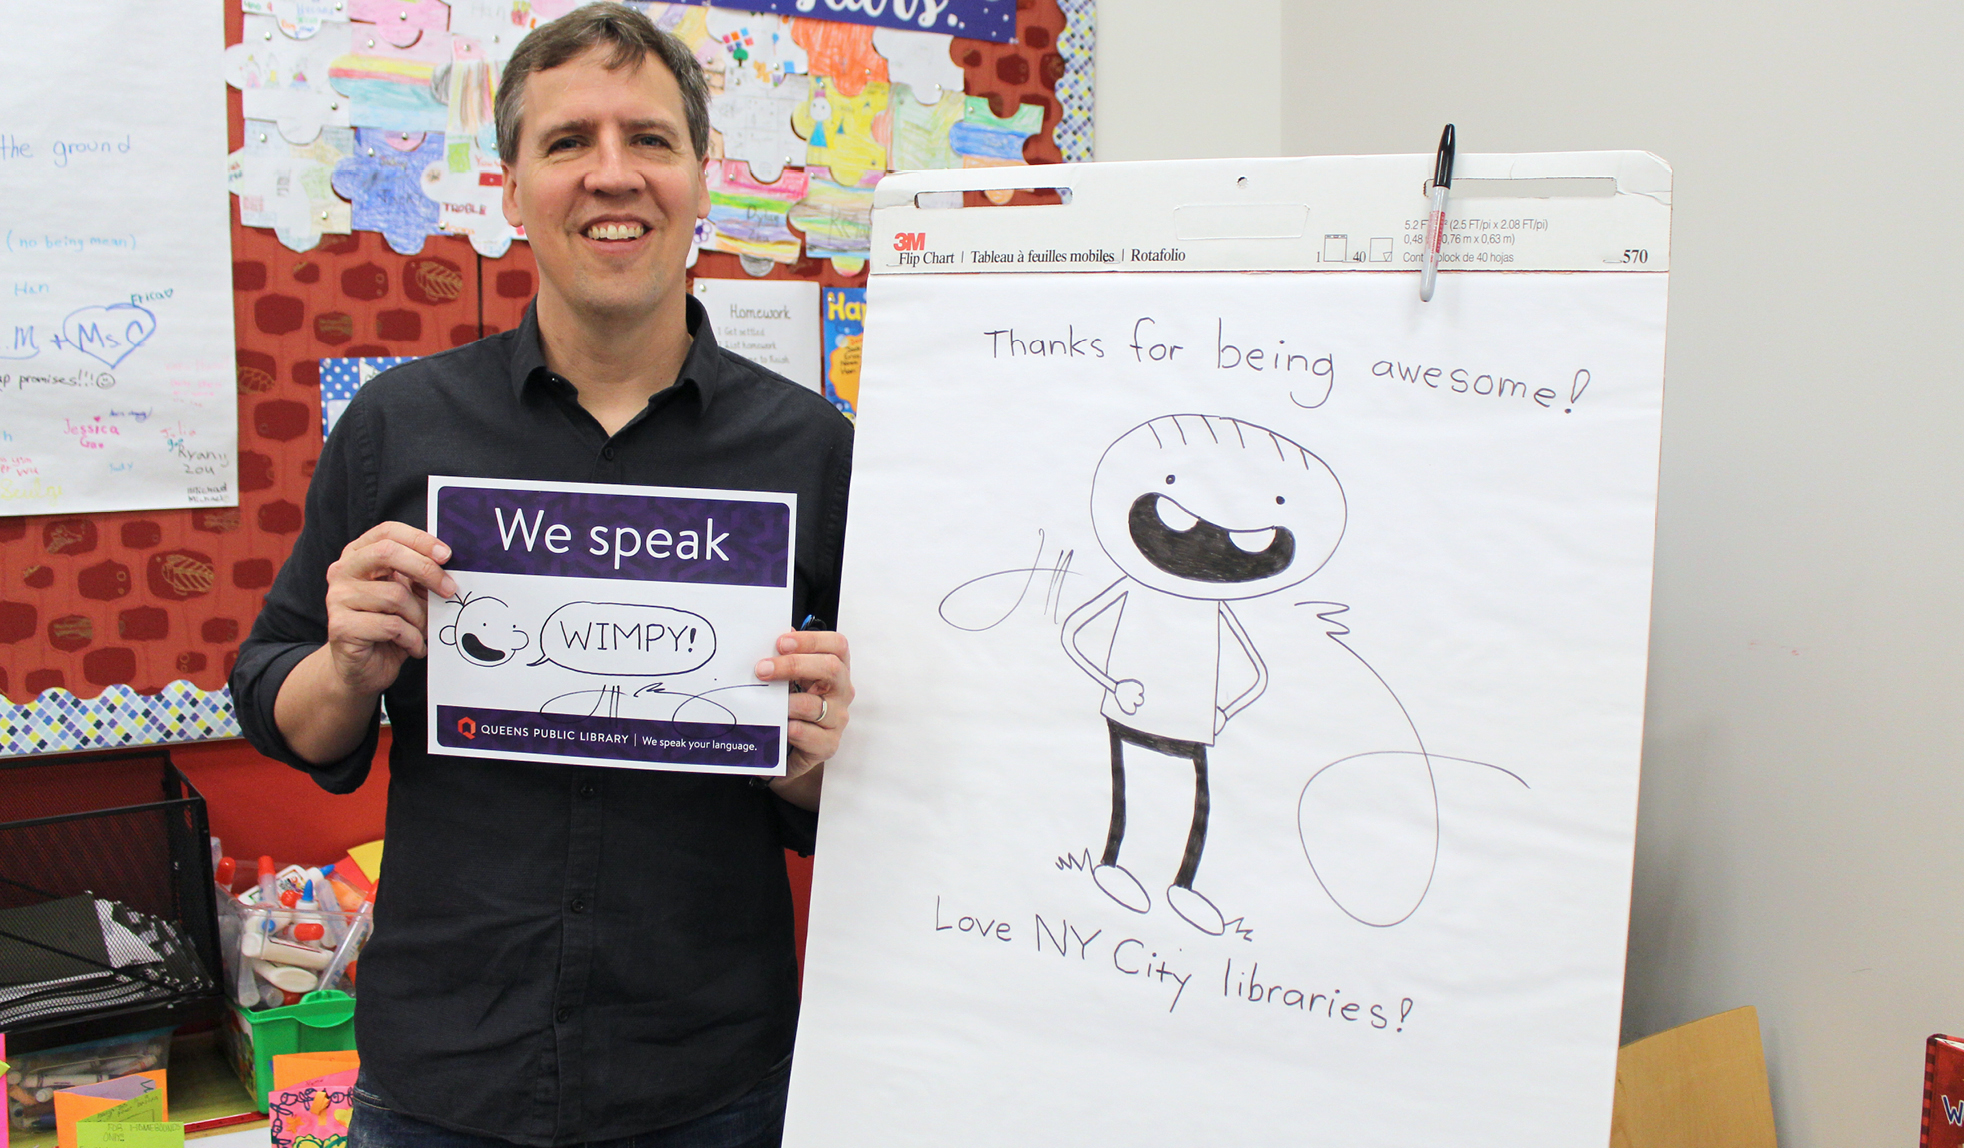 Jeff Kinney at Queens Public Library